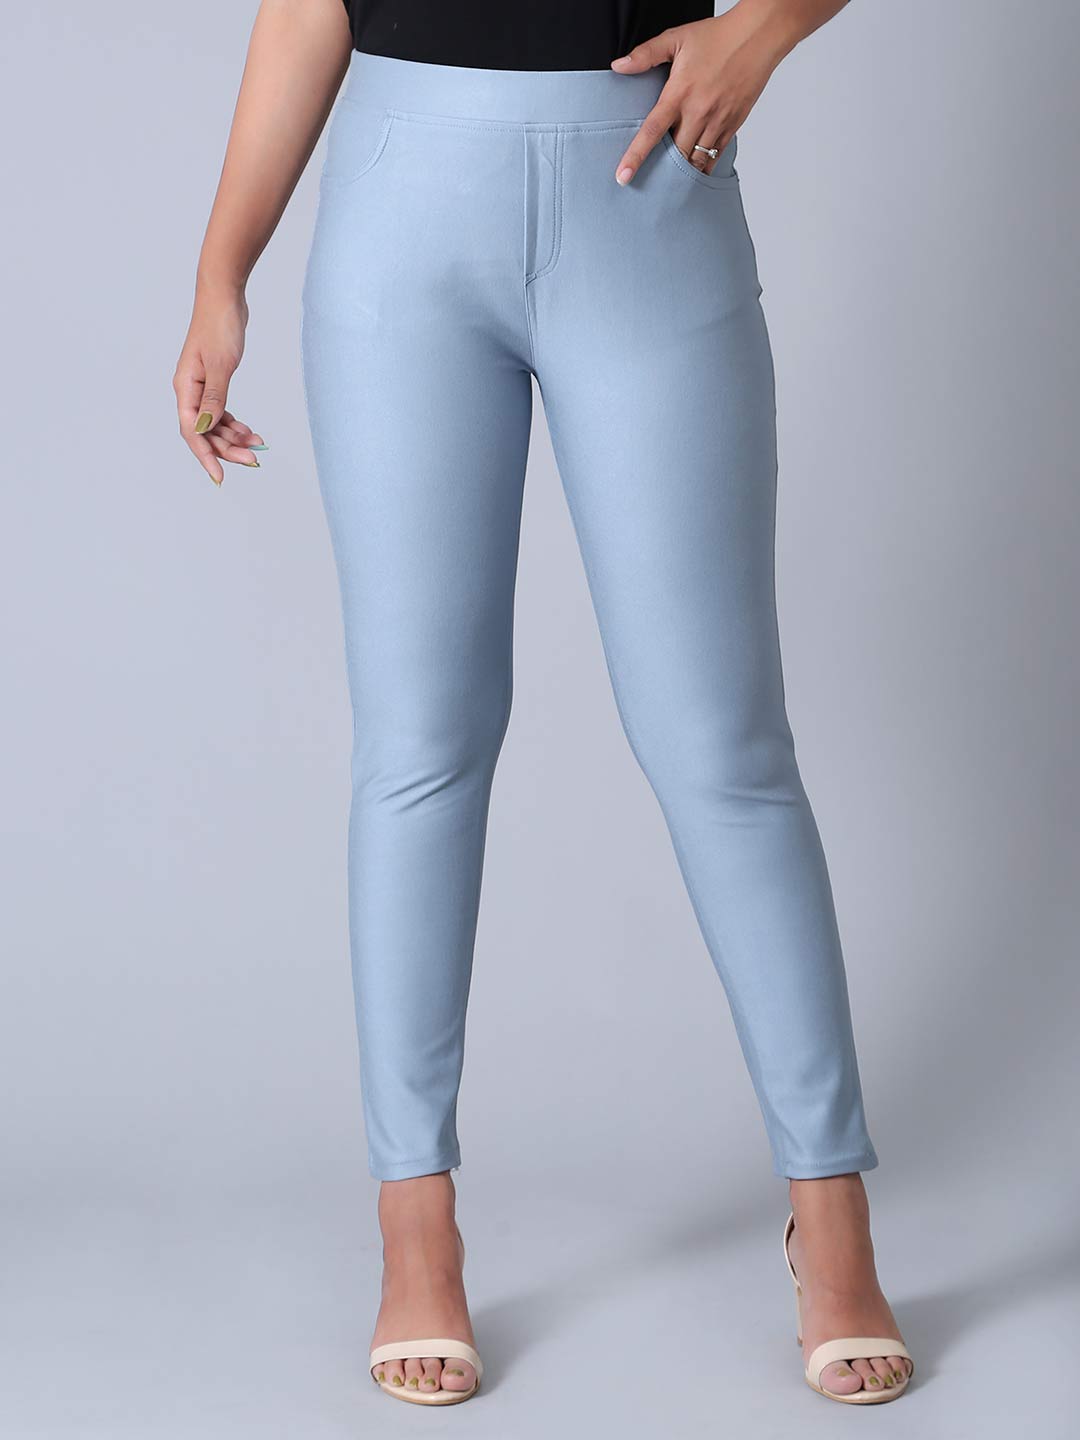 Buy Blue Solid Jeggings Online - W for Woman